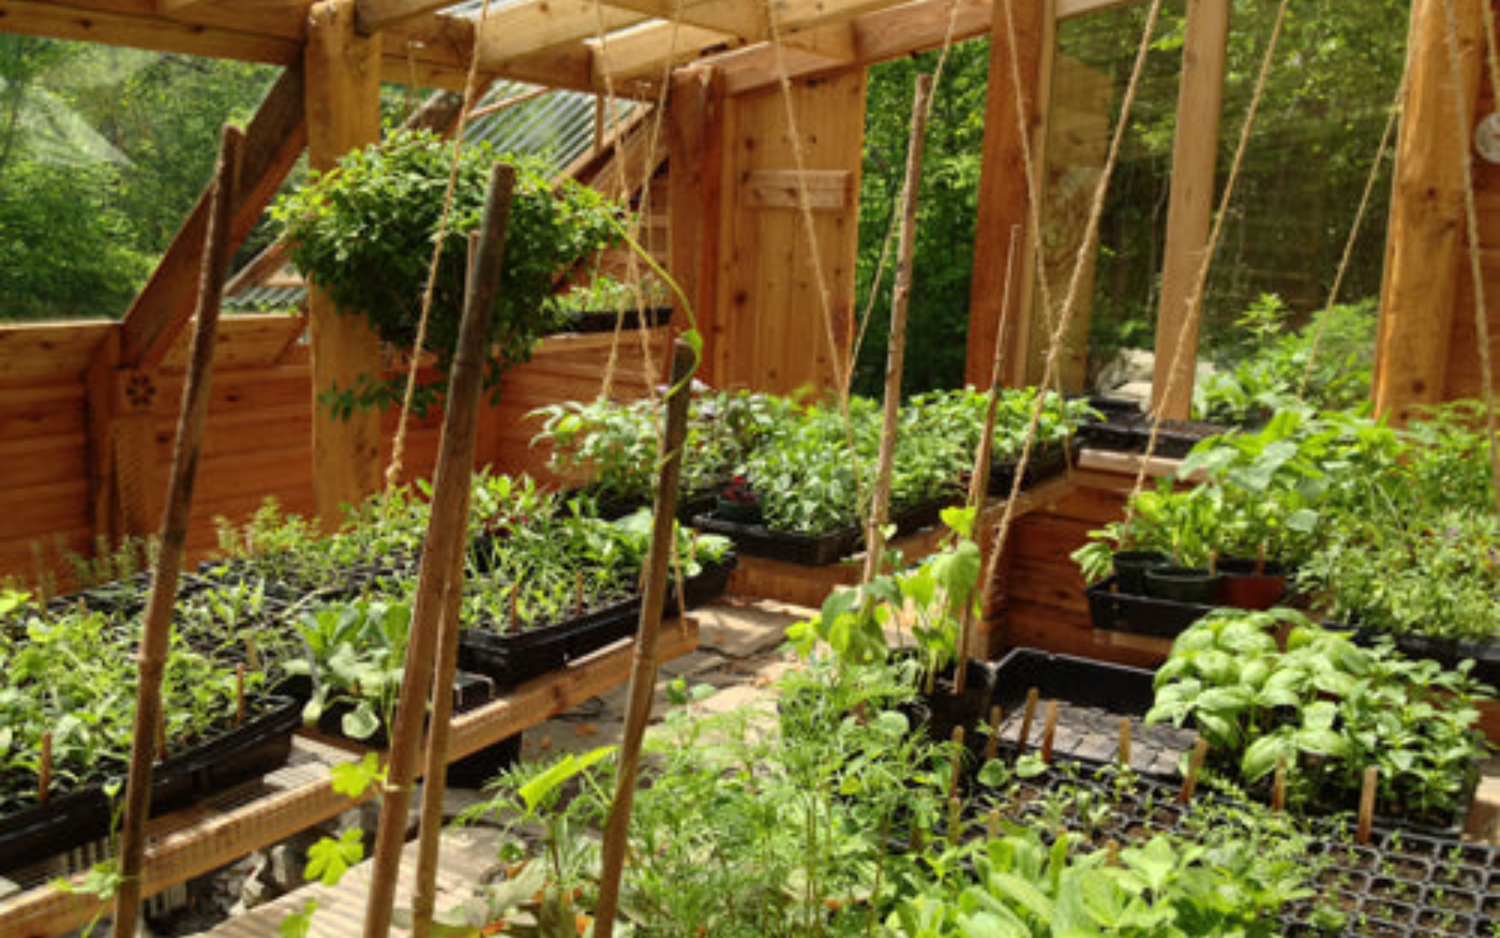 How to Build an Earth Sheltered Greenhouse